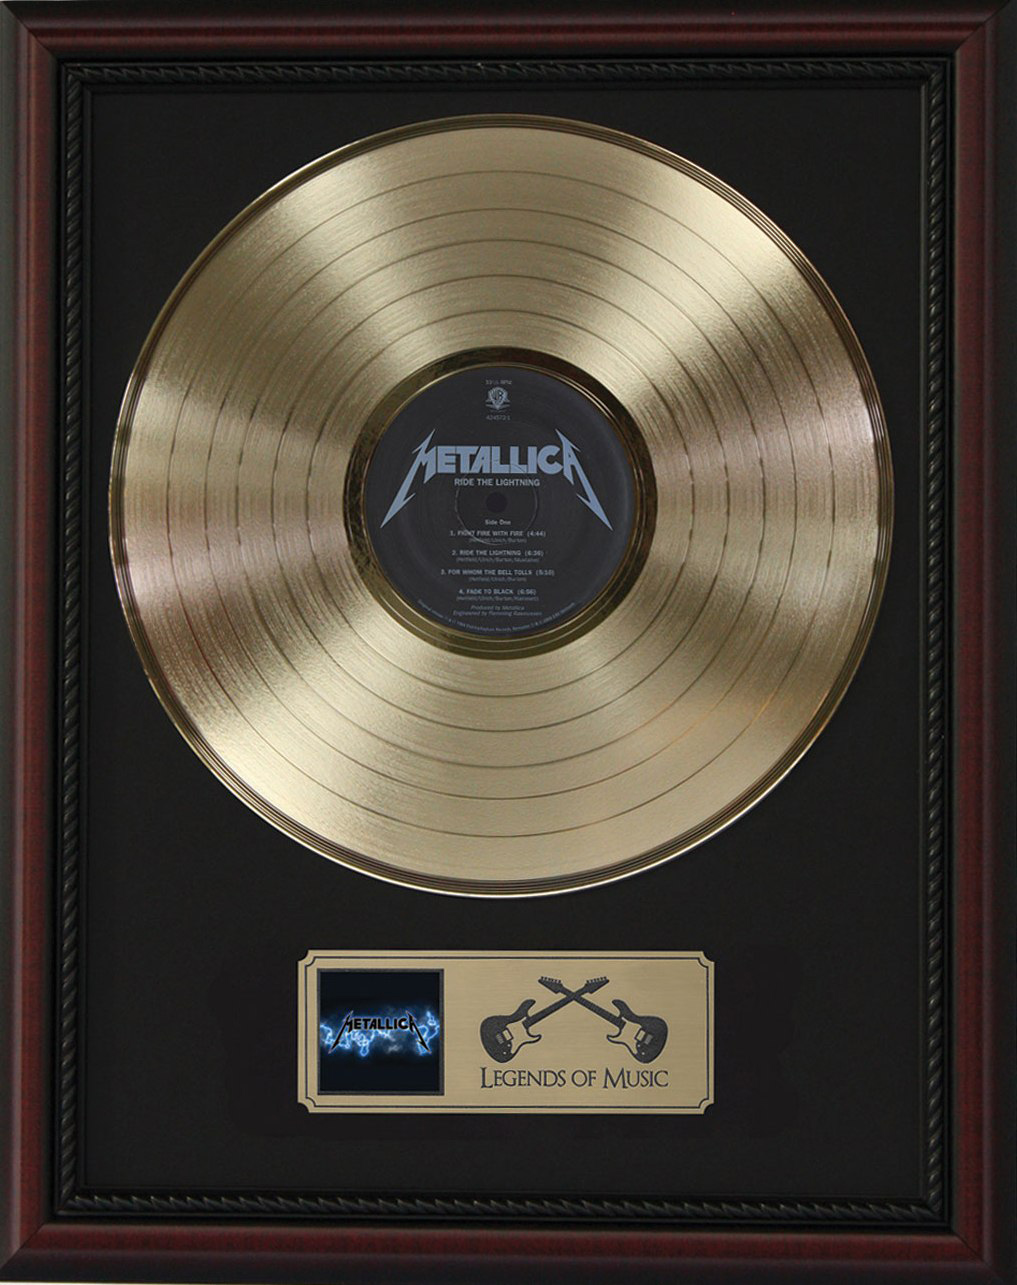 Metallica - One Framed Signature Gold LP Record Display M4 - Gold Record  Outlet Album and Disc Collectible Memorabilia